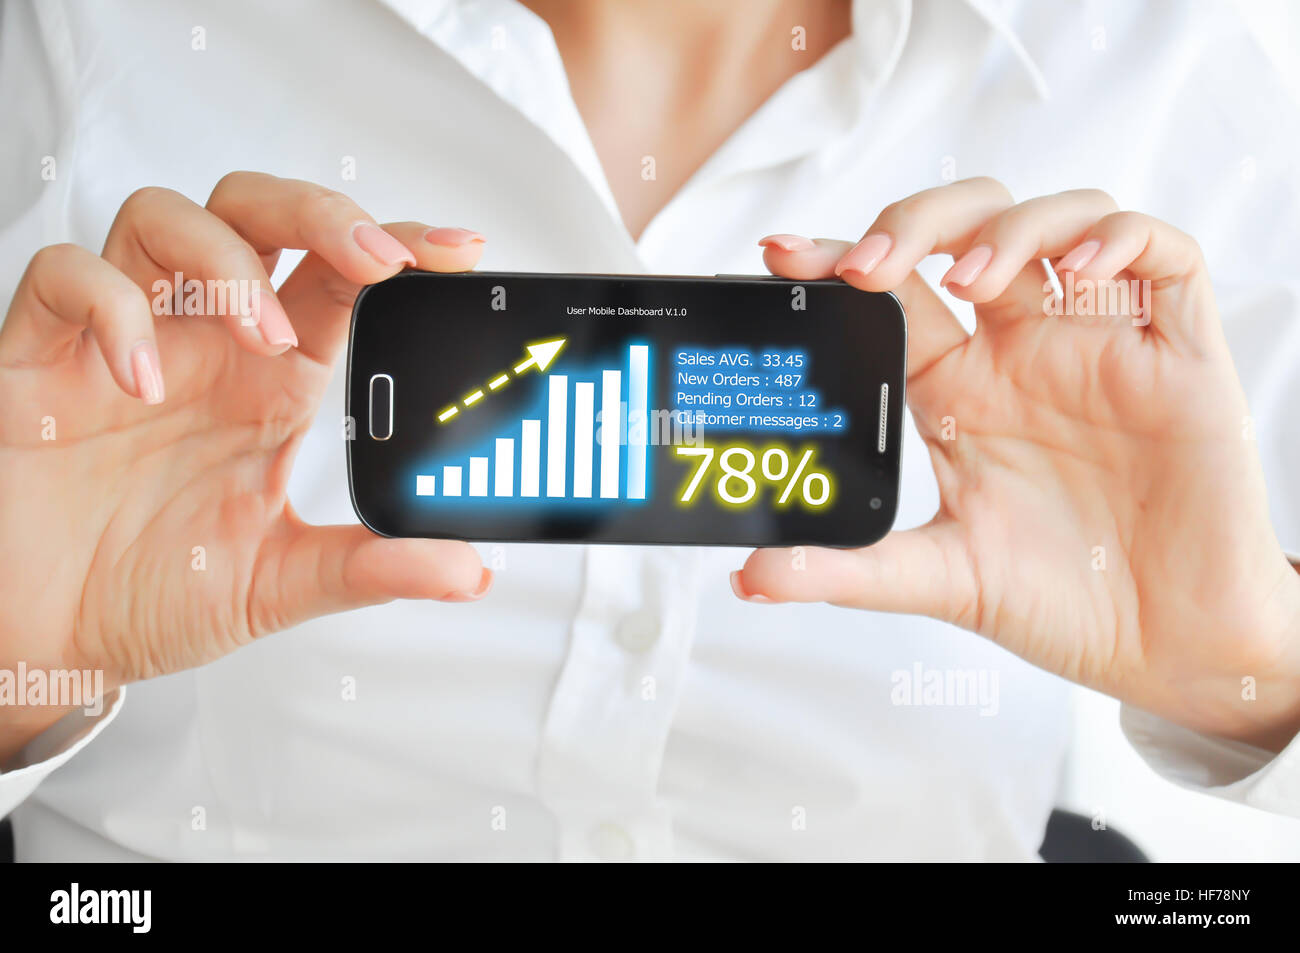 Mobile device sales dashboard or interface to monitor your business online Stock Photo